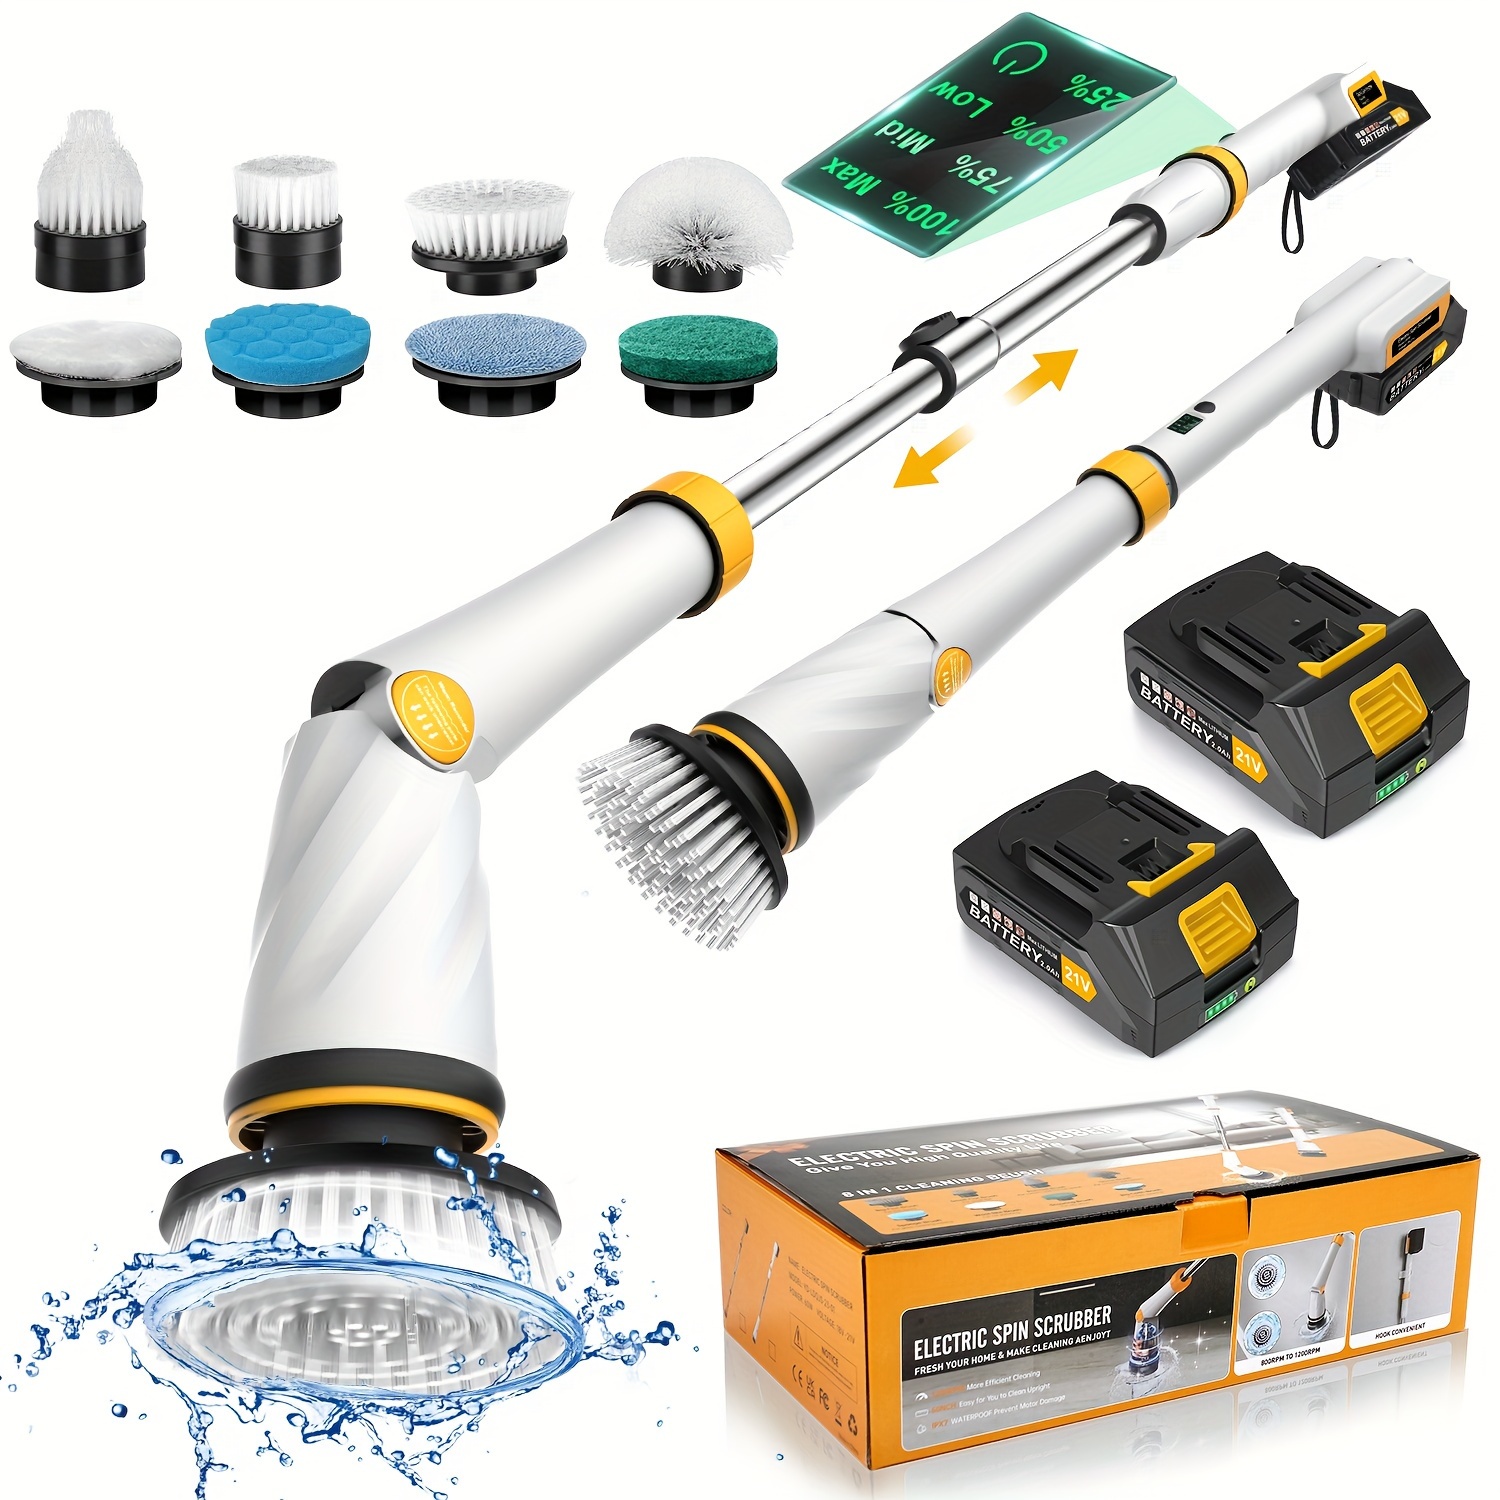 

1200 Rpm Powerful Electric Spin Scrubber With 8 Cleaning Brush, Cordless Shower Scrubber